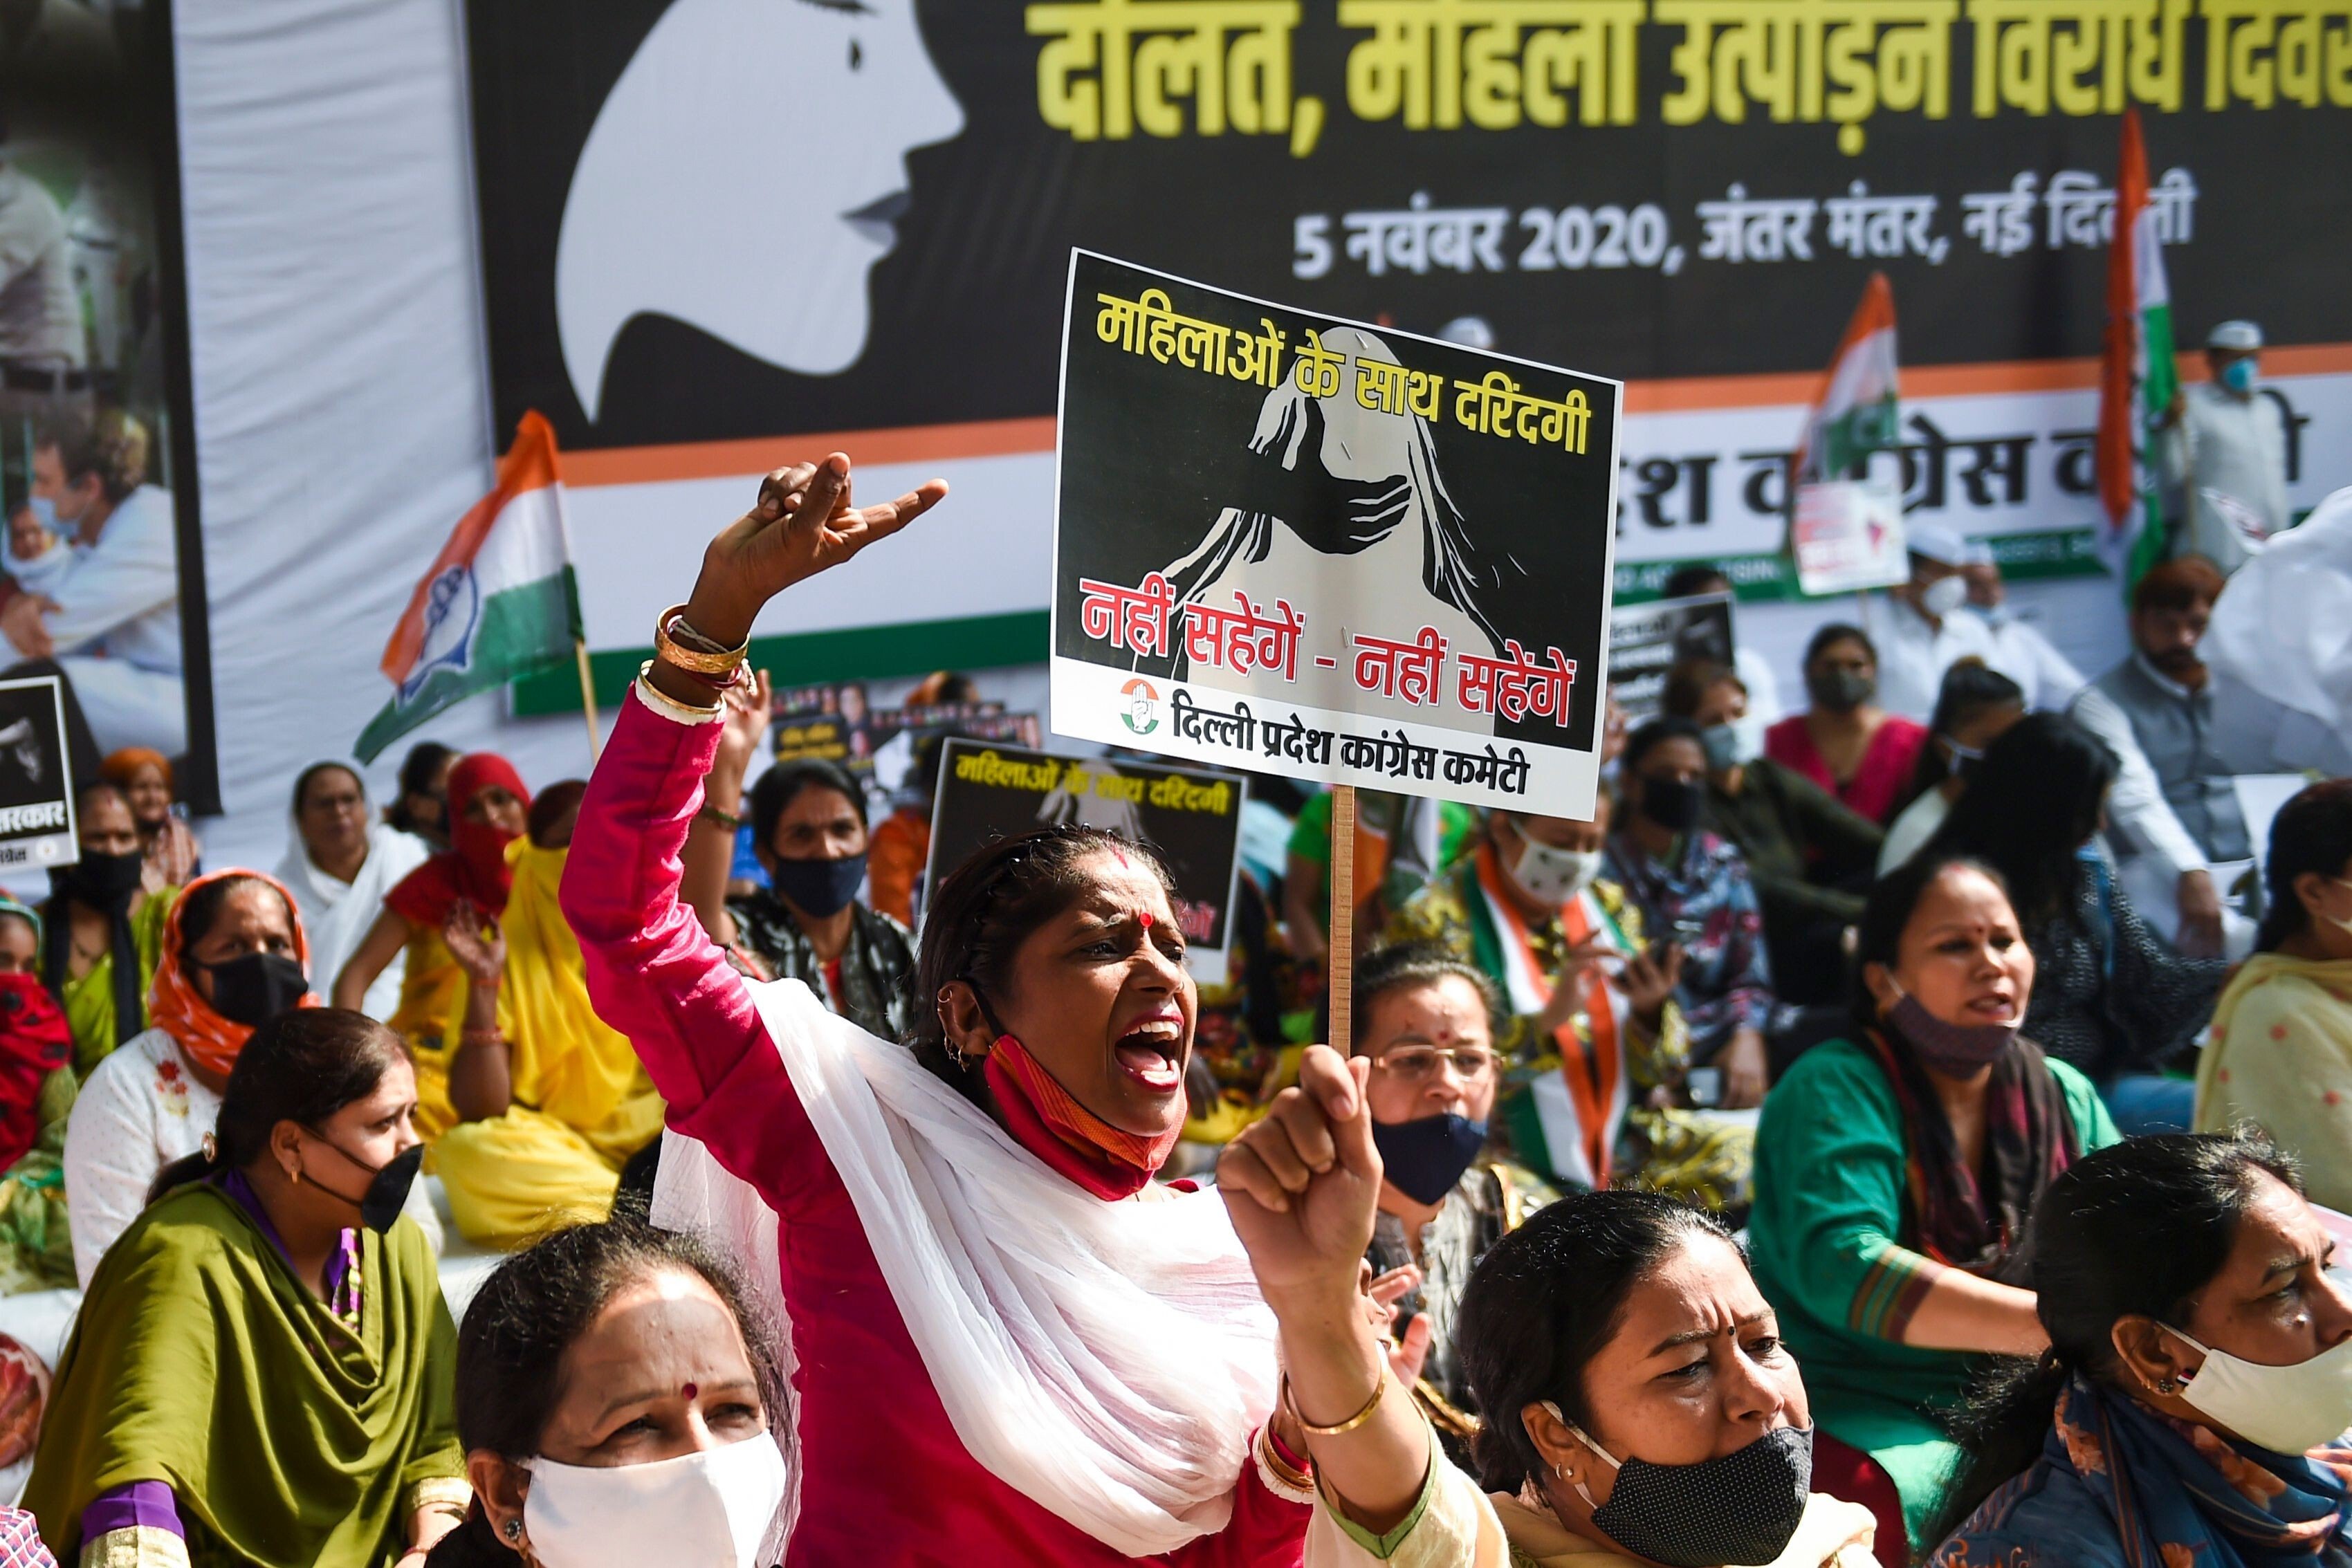 Protesters shout slogans during a demonstration in New Delhi, on November 5, 2020, against atrocities committed on women in India. Photo: AFP